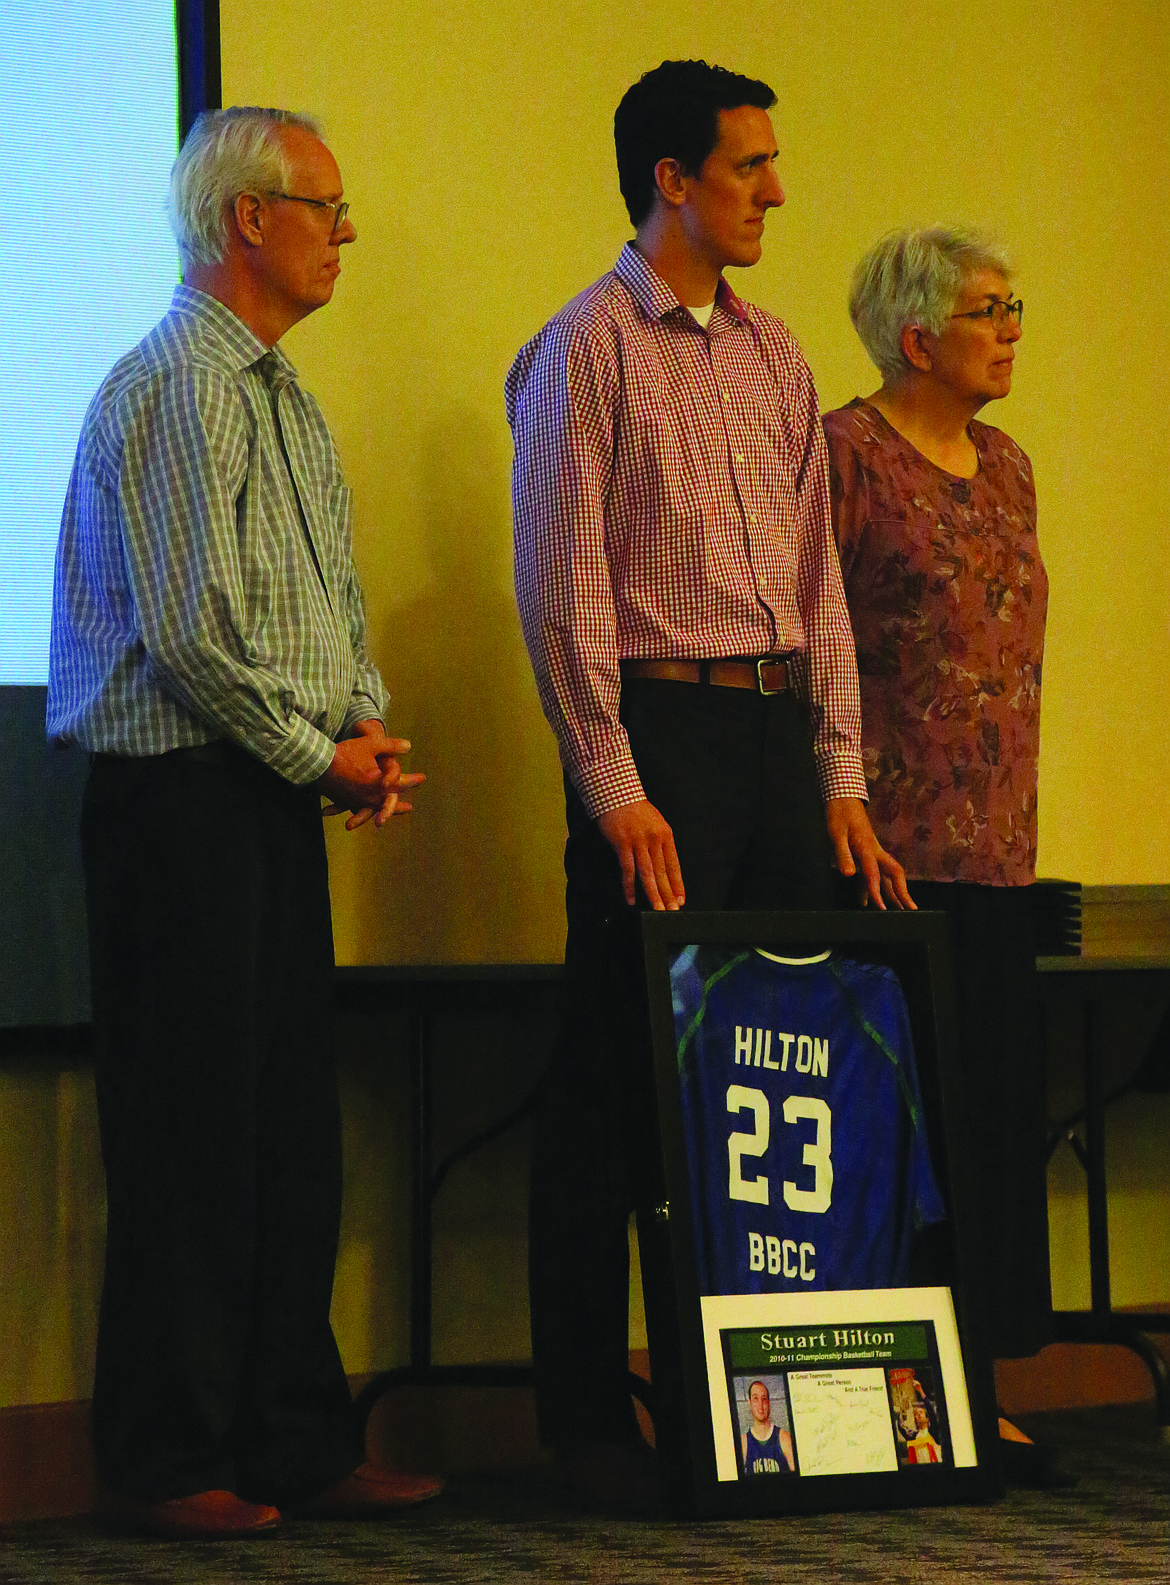 Connor Vanderweyst/Columbia Basin Herald 
 Former Big Bend basketball player Stuart Hilton, who passed away in 2016, was honored with a framed shooting shirt and commemorative message at the college’s Hall of Fame banquet. Stuart’s parents, Hugh and Nalene, and his brother Shaun accepted the shirt.